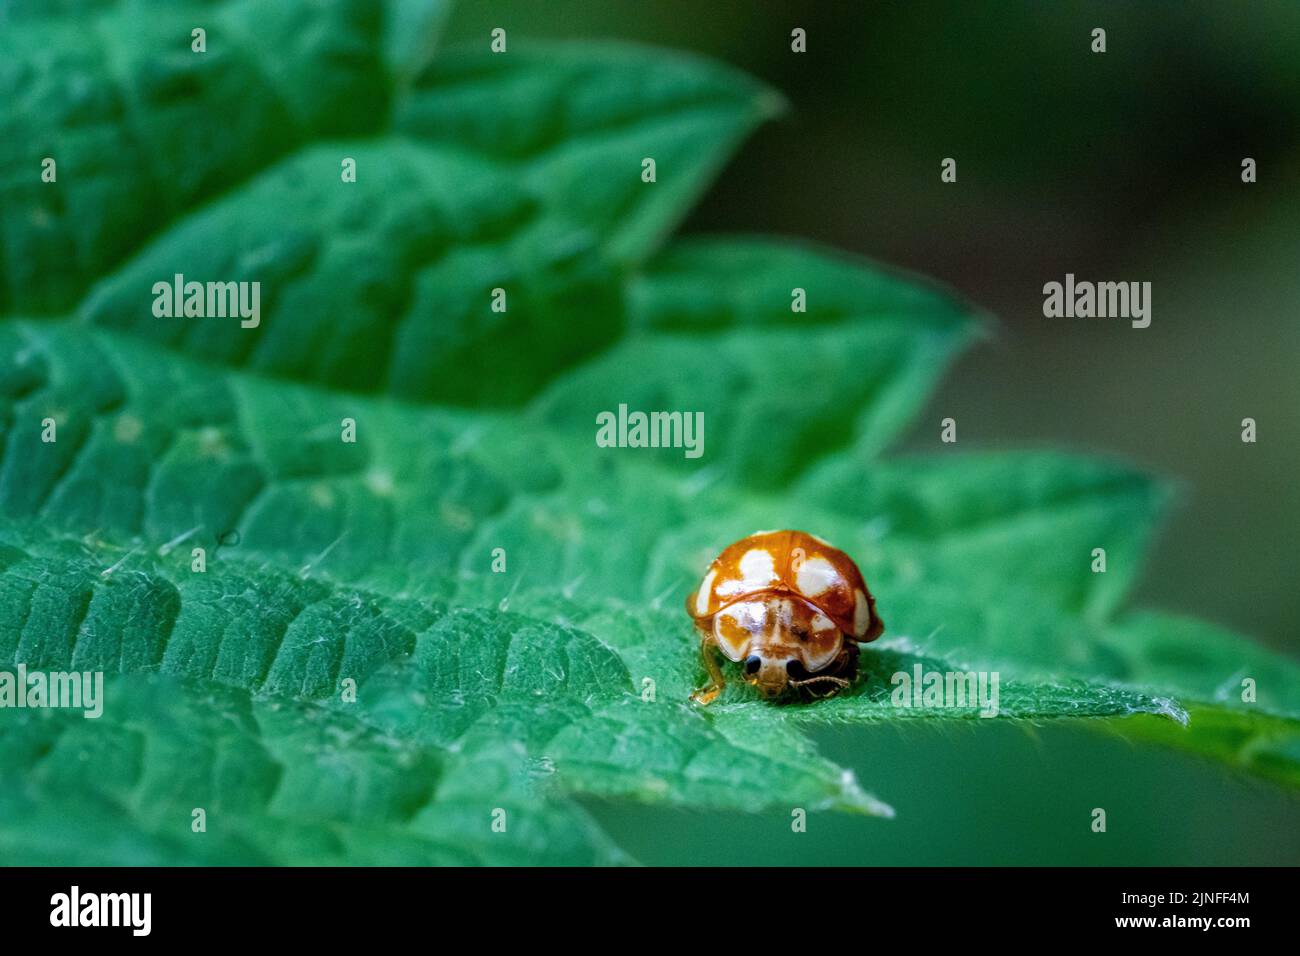 A closeup shot of a small ladybird beetle perched on a green leaf surface in daylight Stock Photo